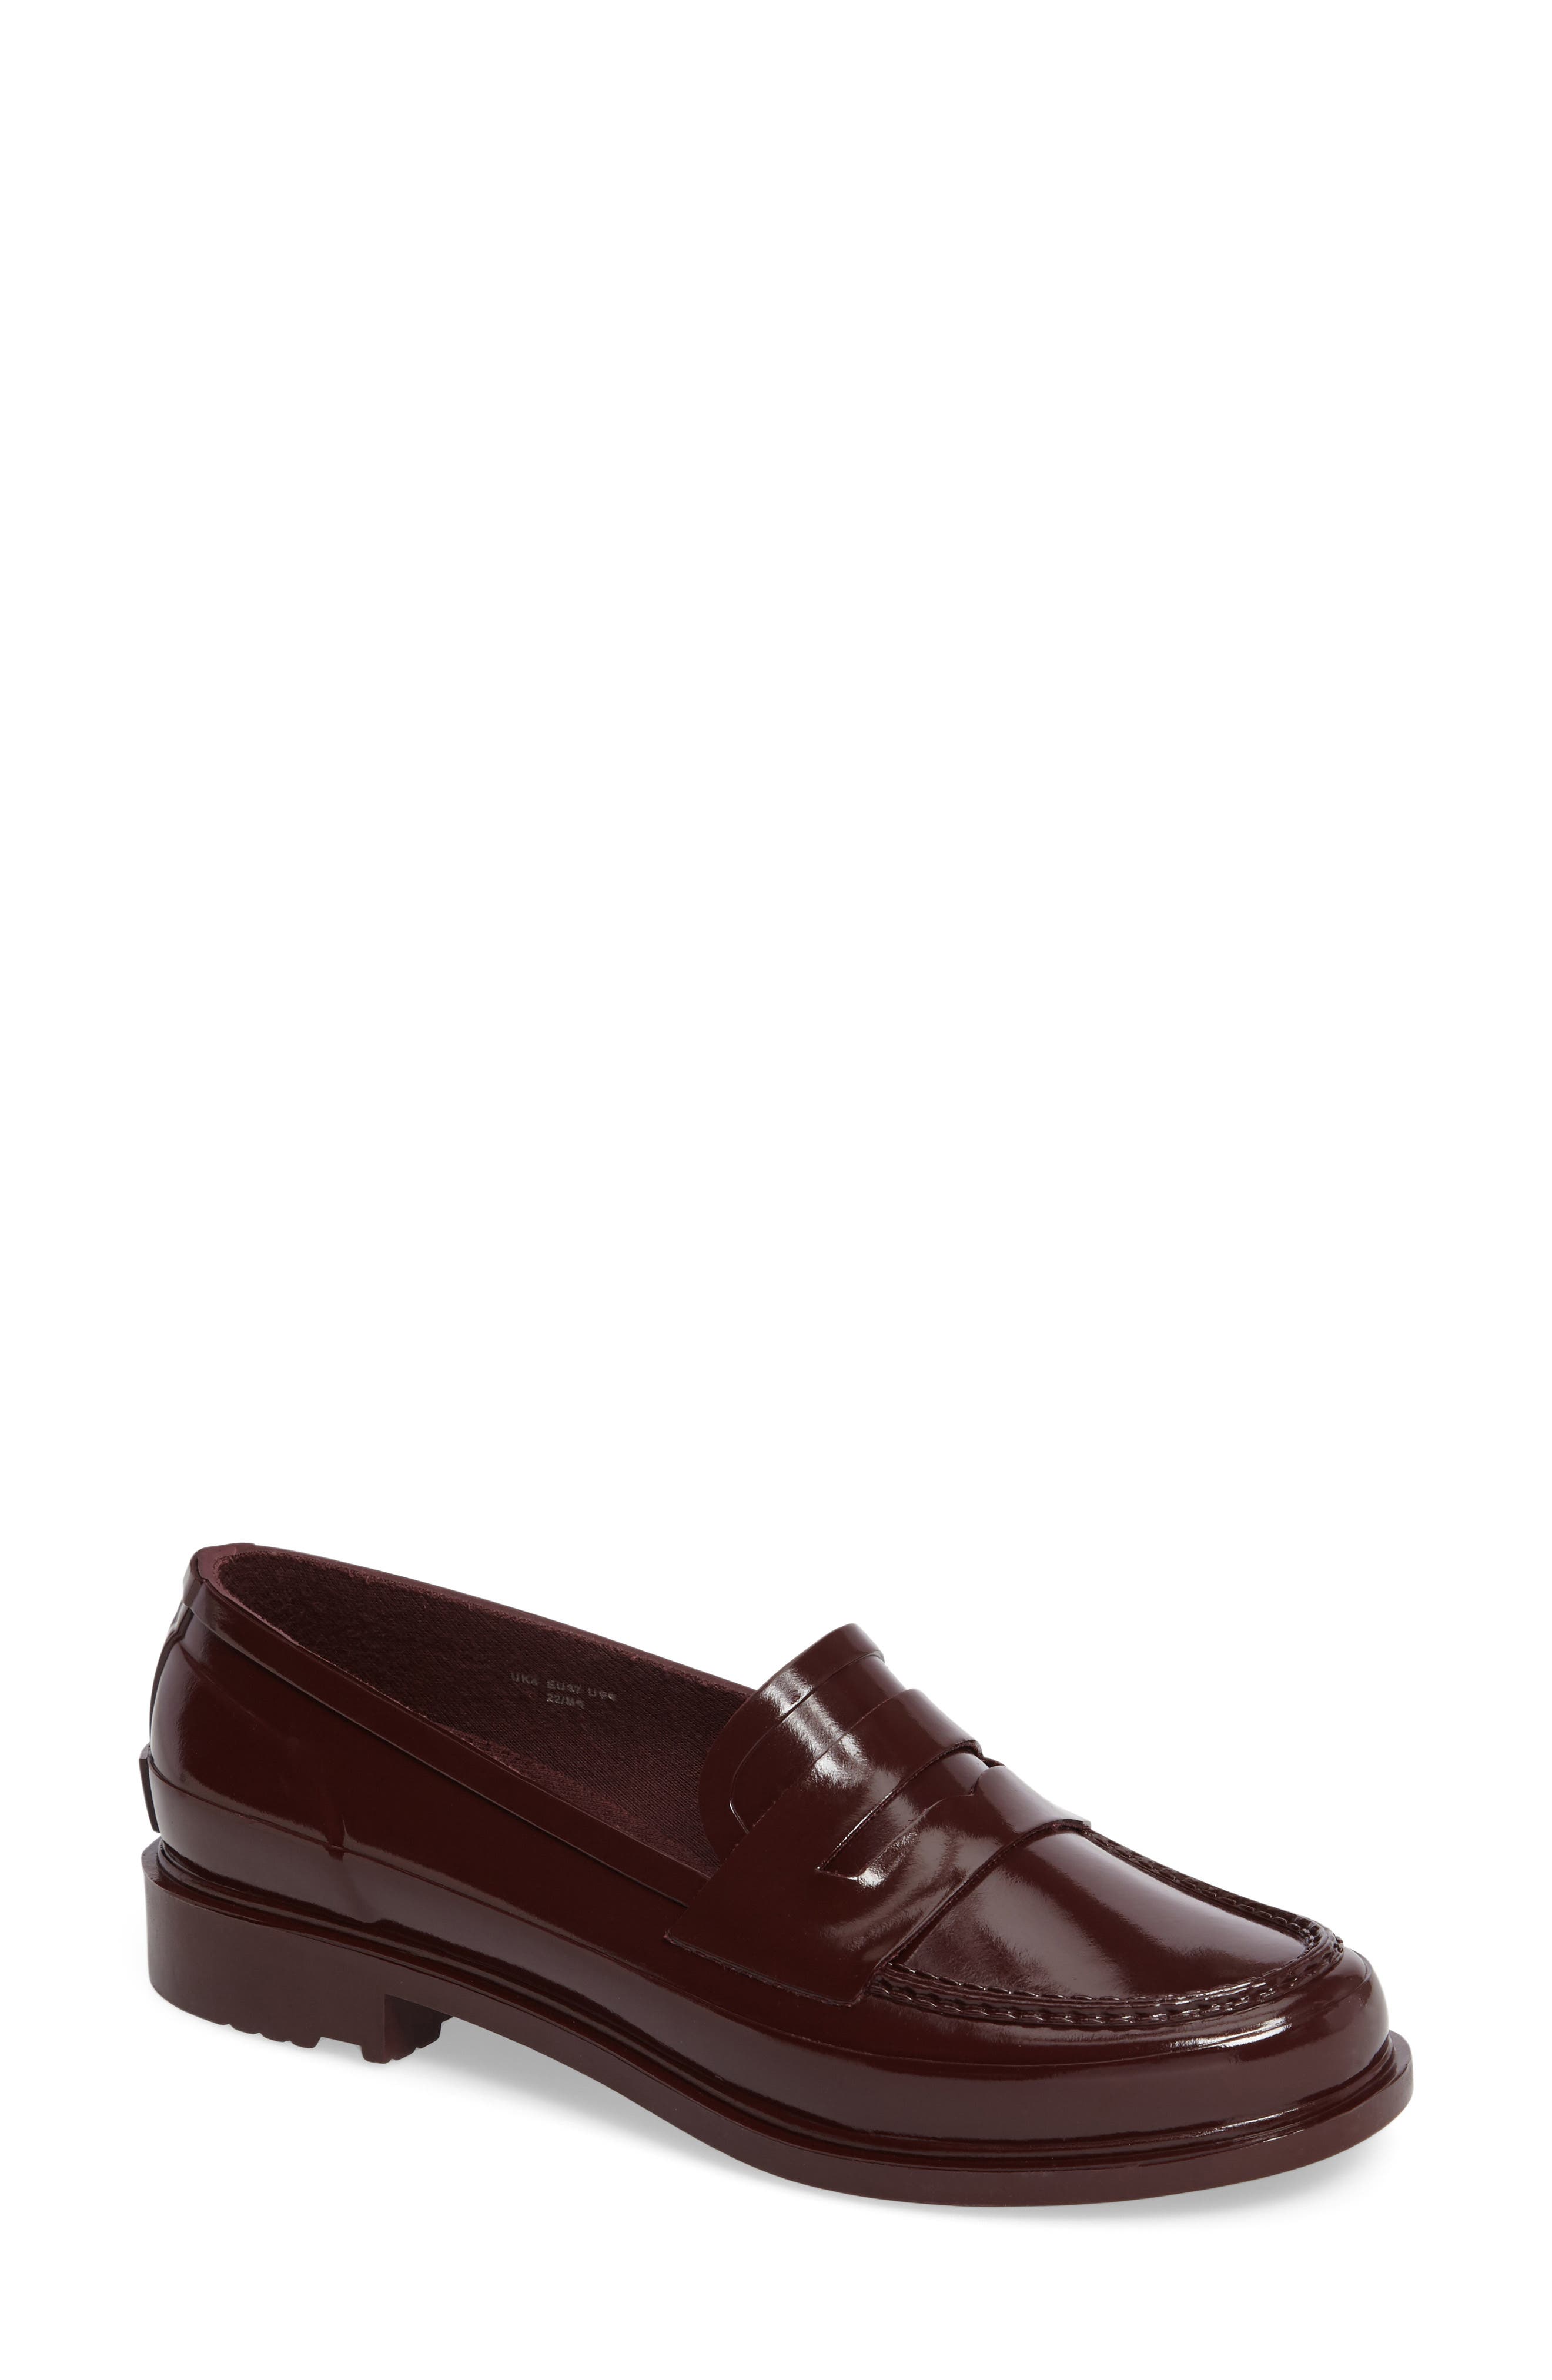 hunter penny loafers